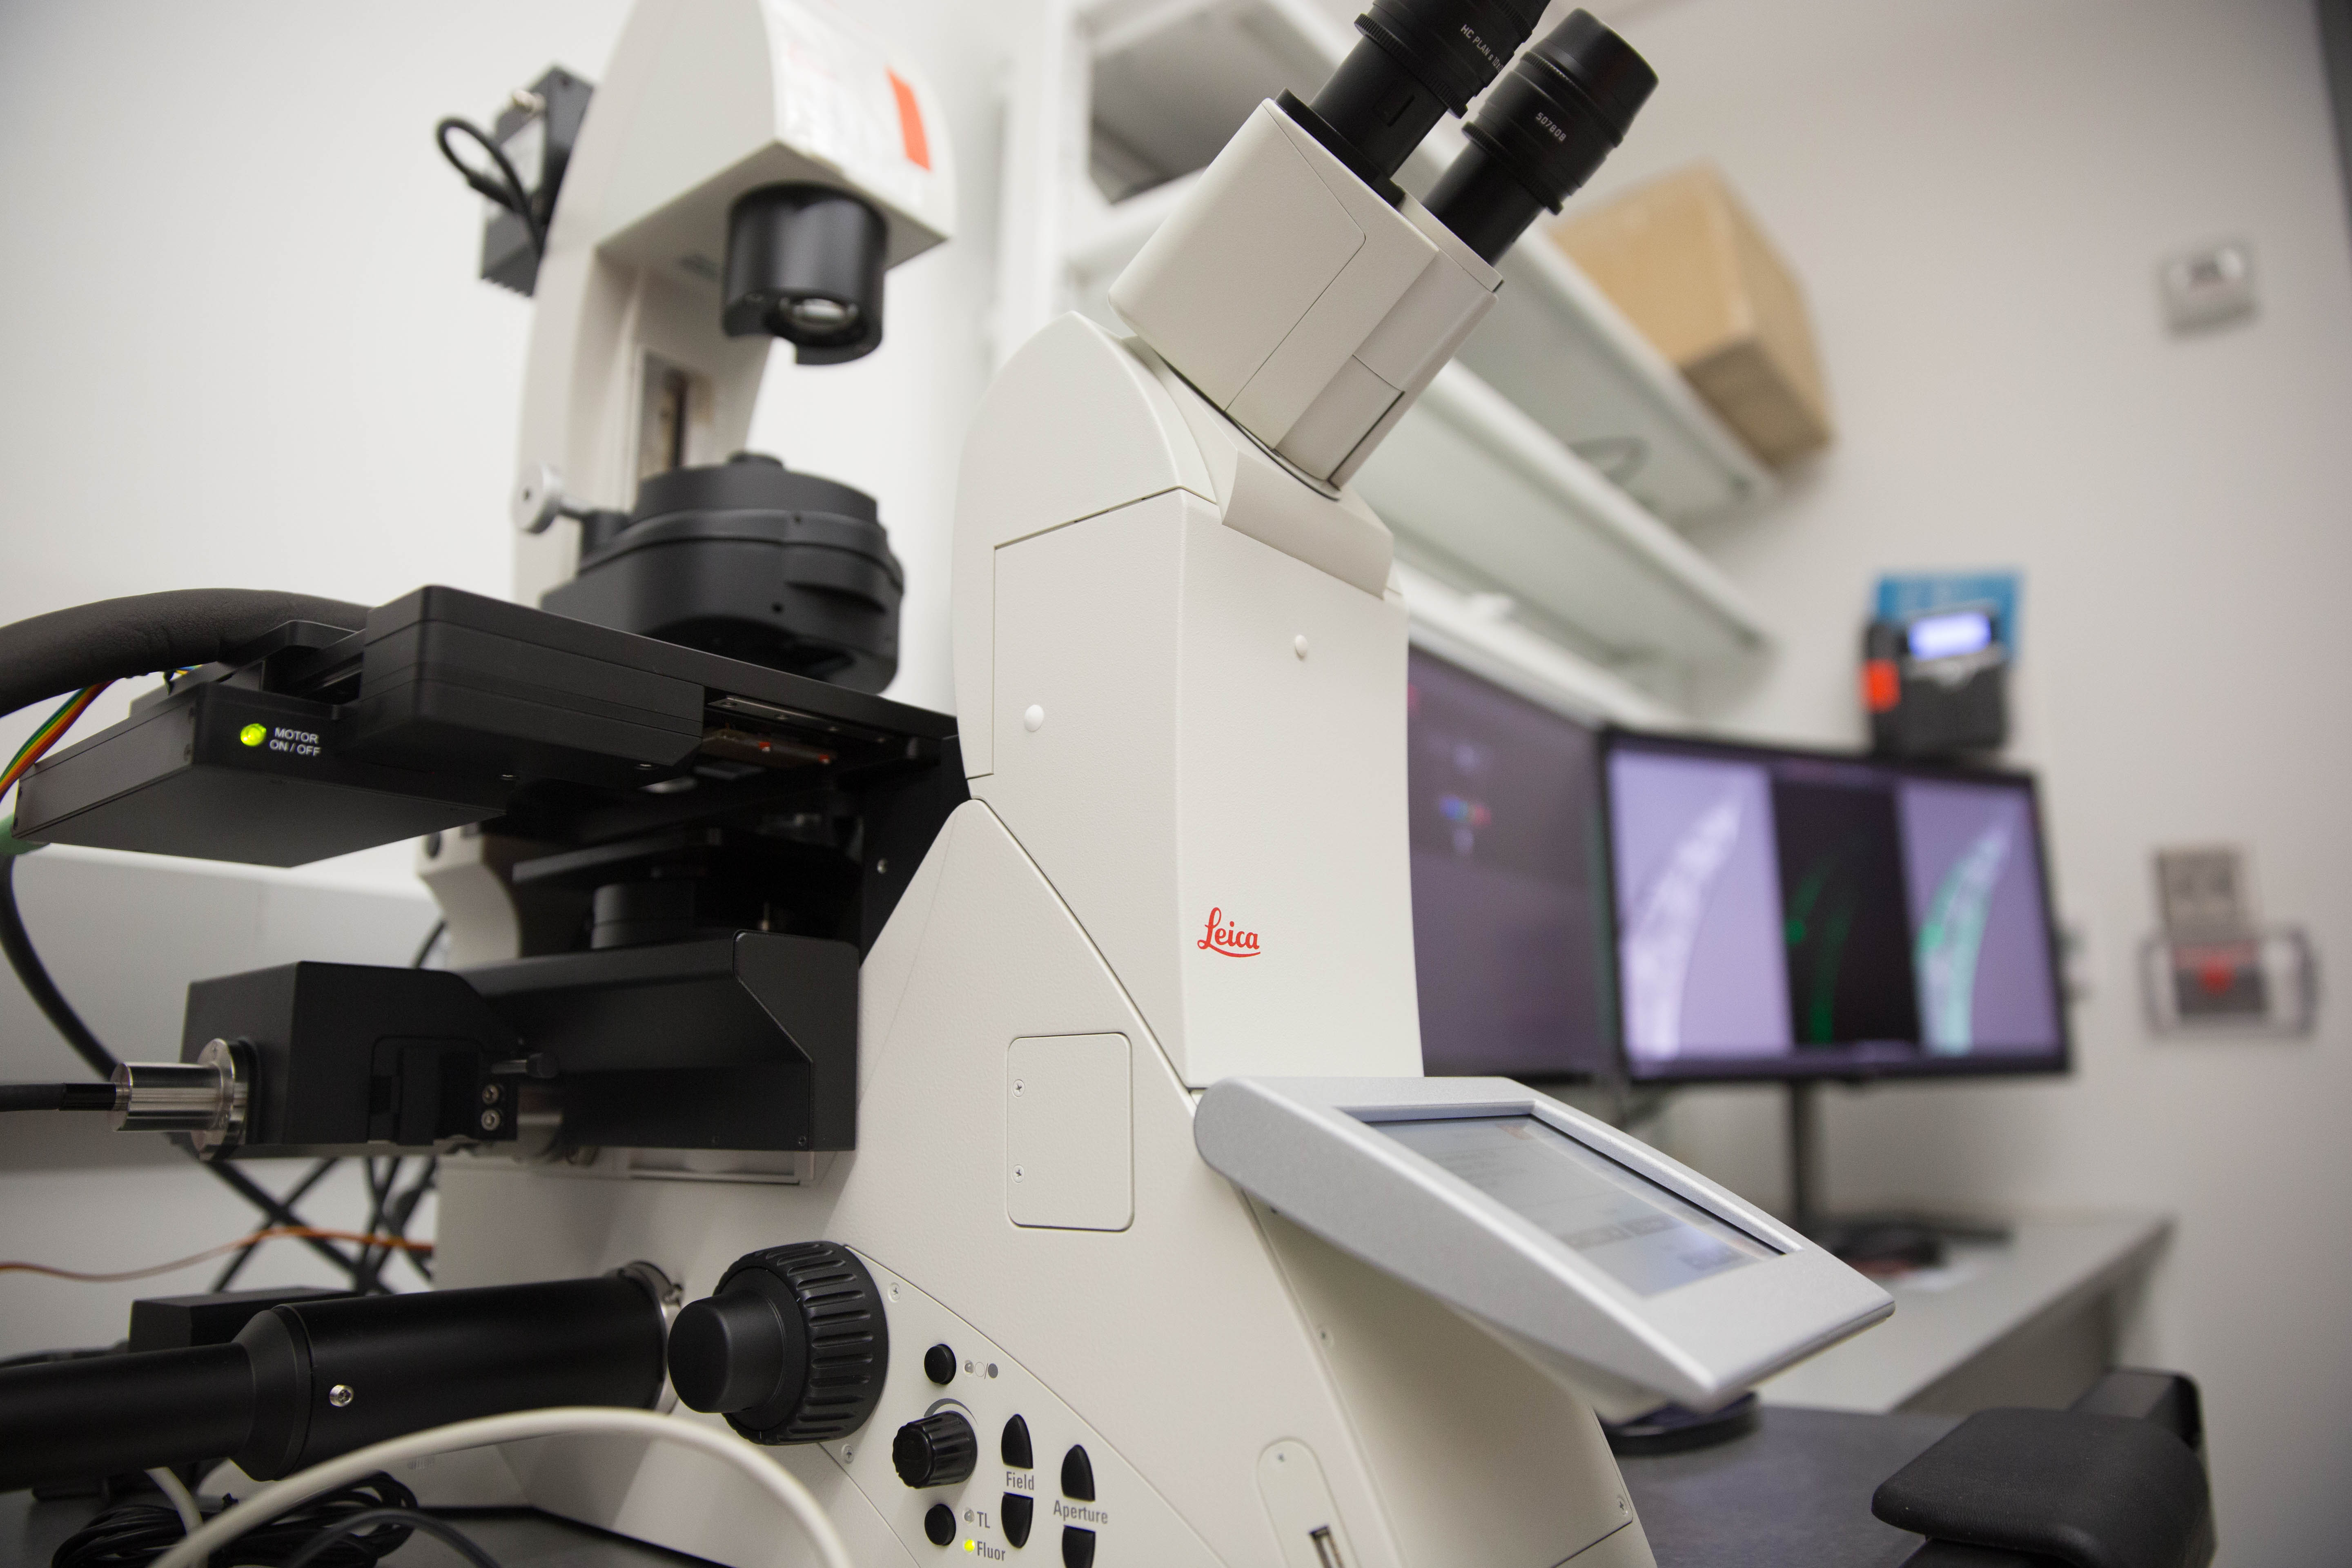 Leica microscope in the GWNIC imaging suite